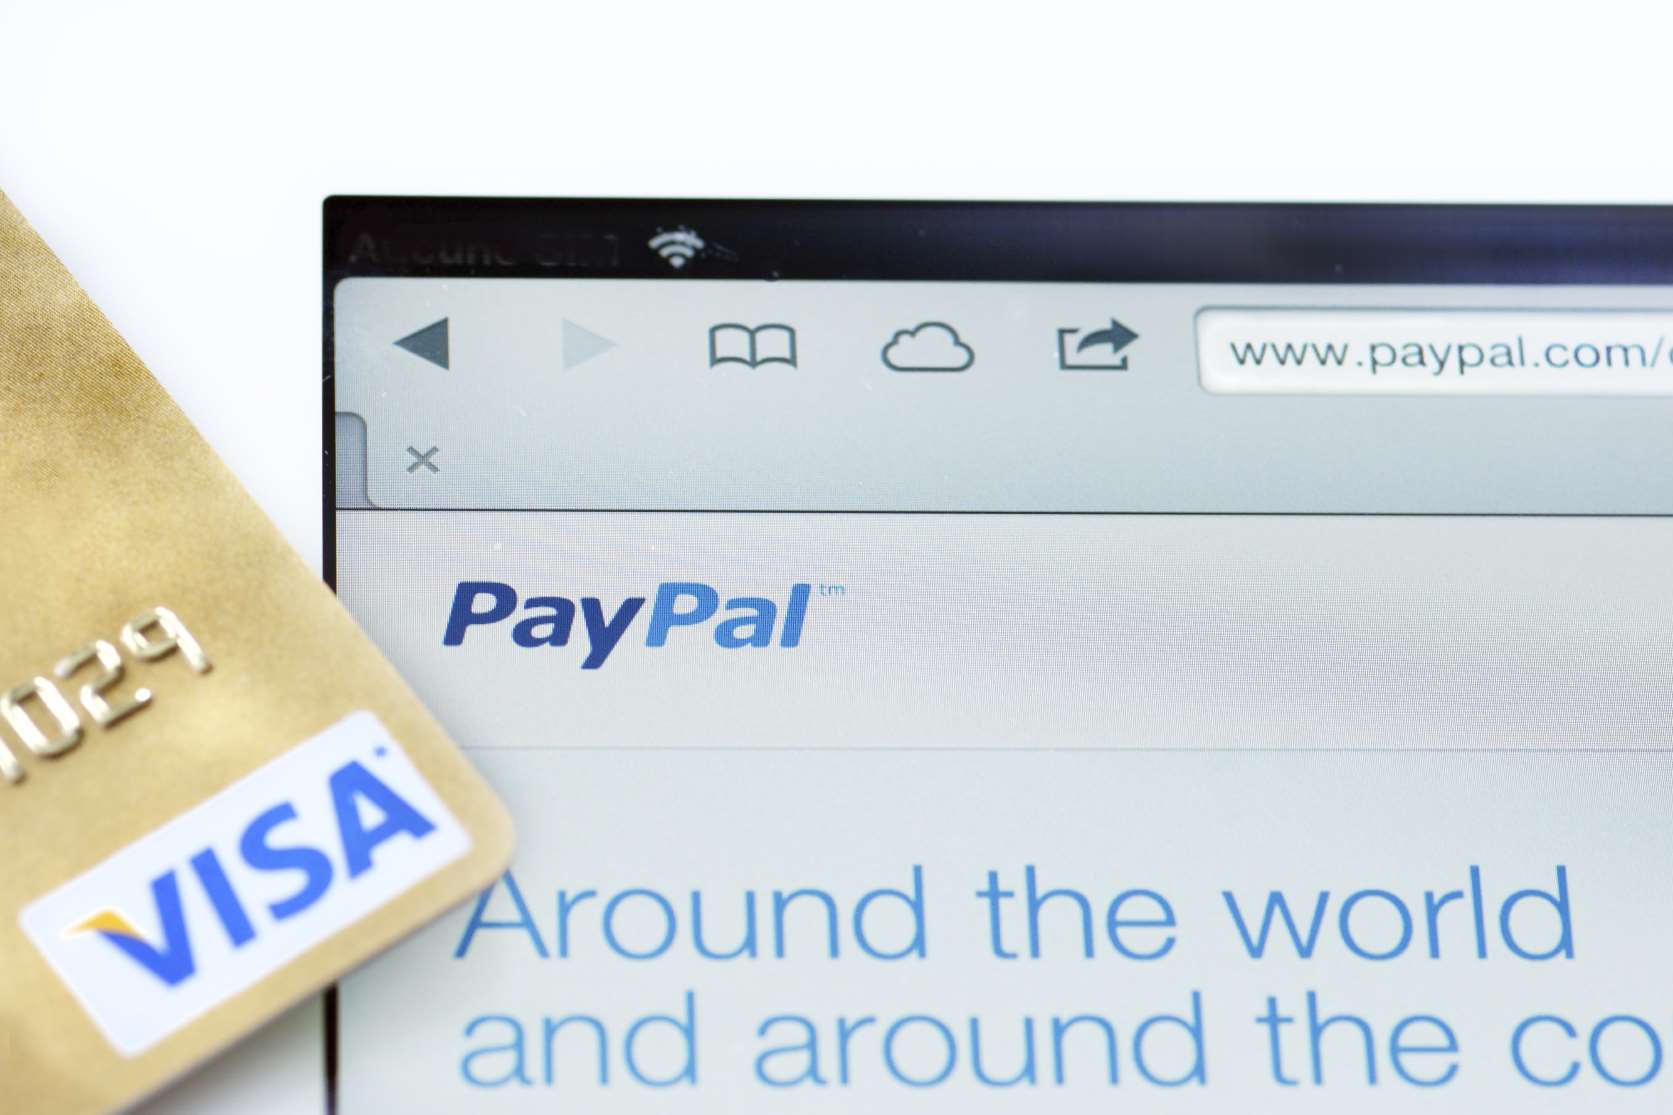 The fraudsters hacked the victim's PayPal account